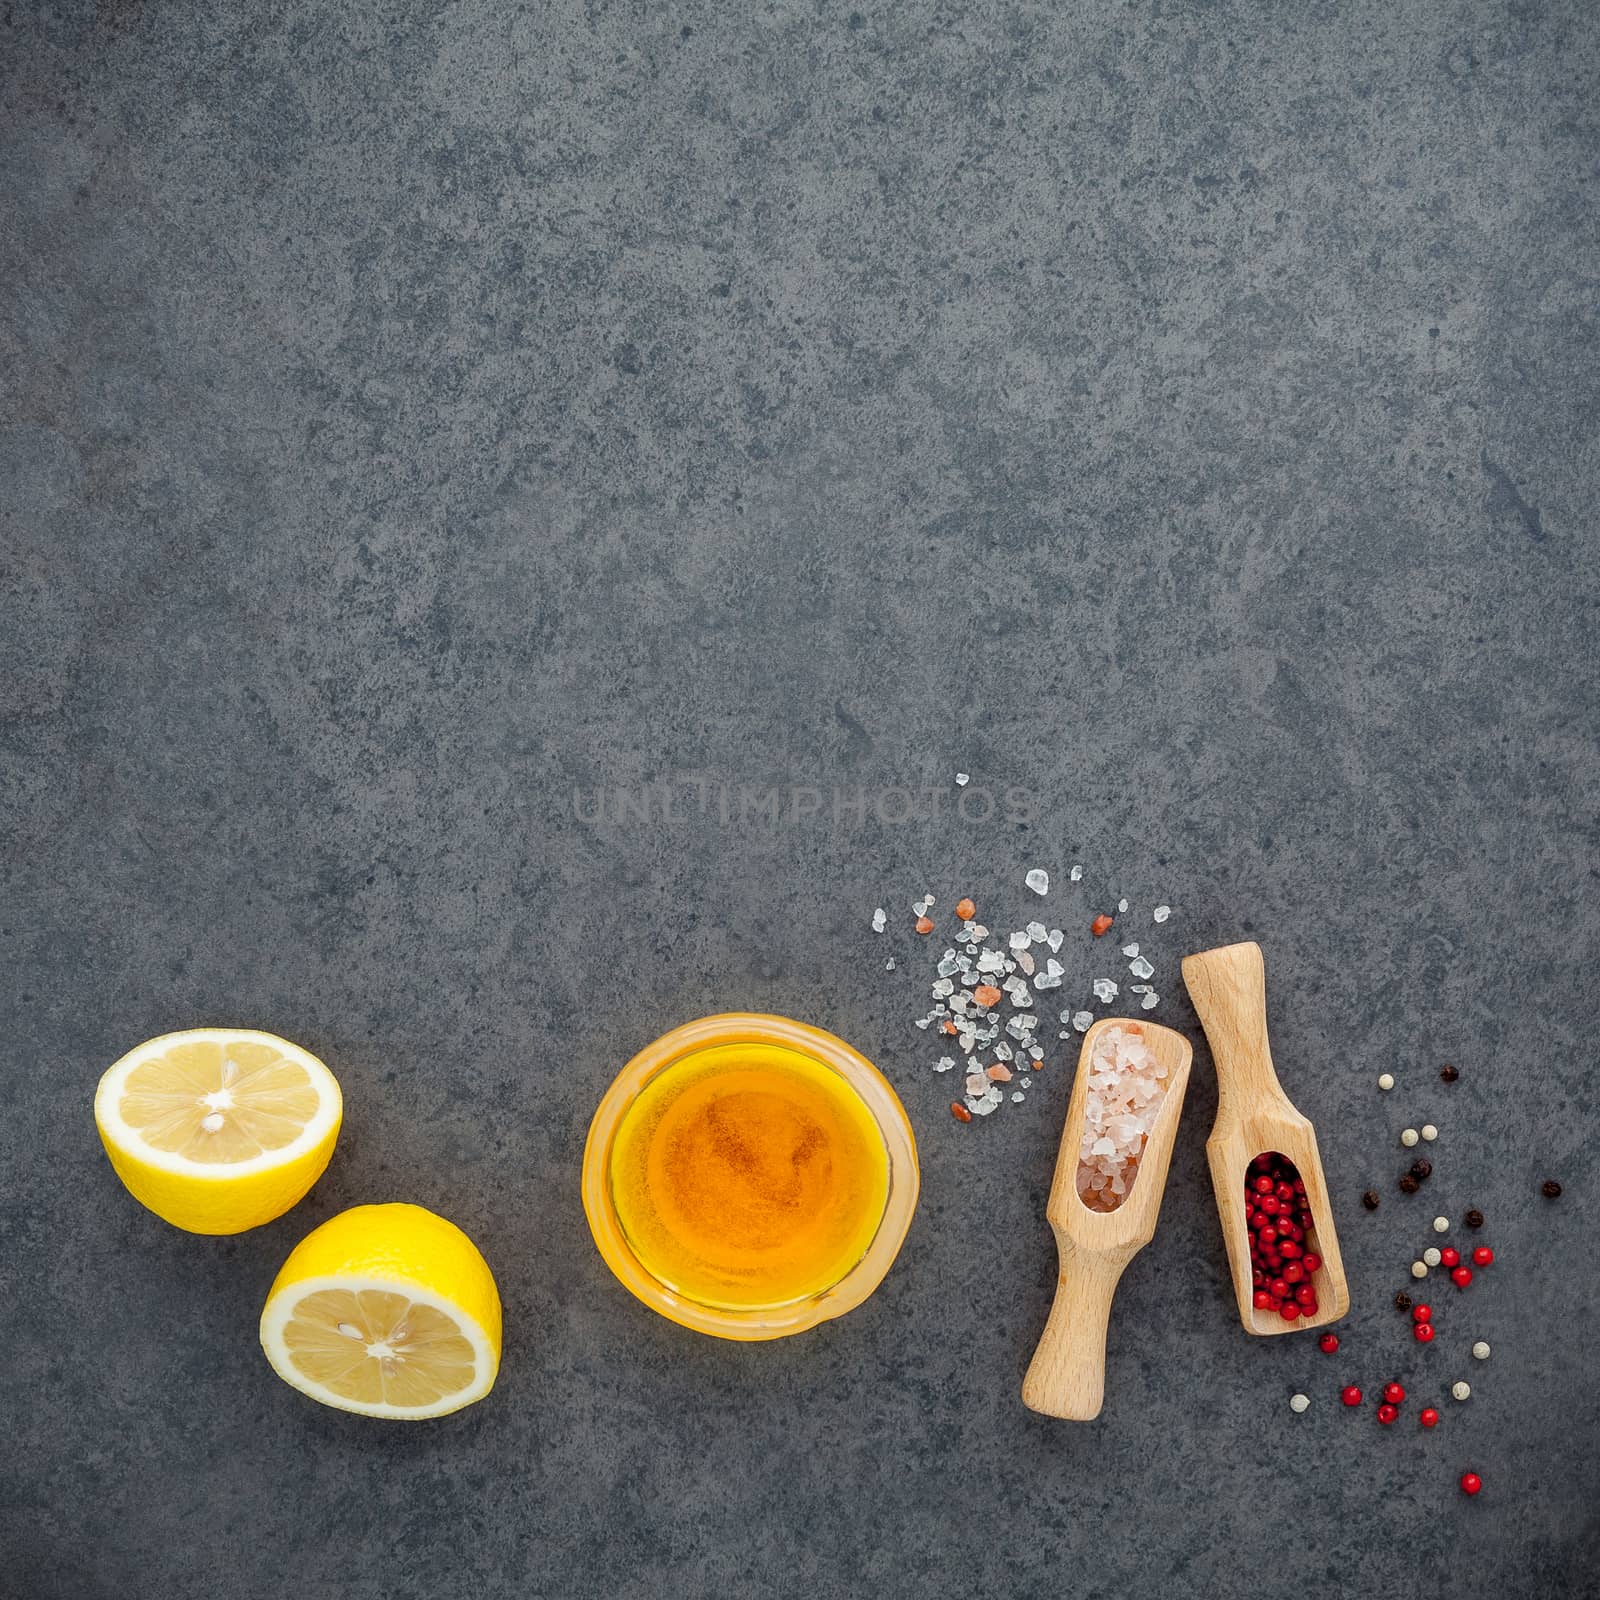 The lemon vinaigrette dressing ingredients lemon, olive oil, himalayan salt and pepper corn on dark stone background with flat lay and copy space.